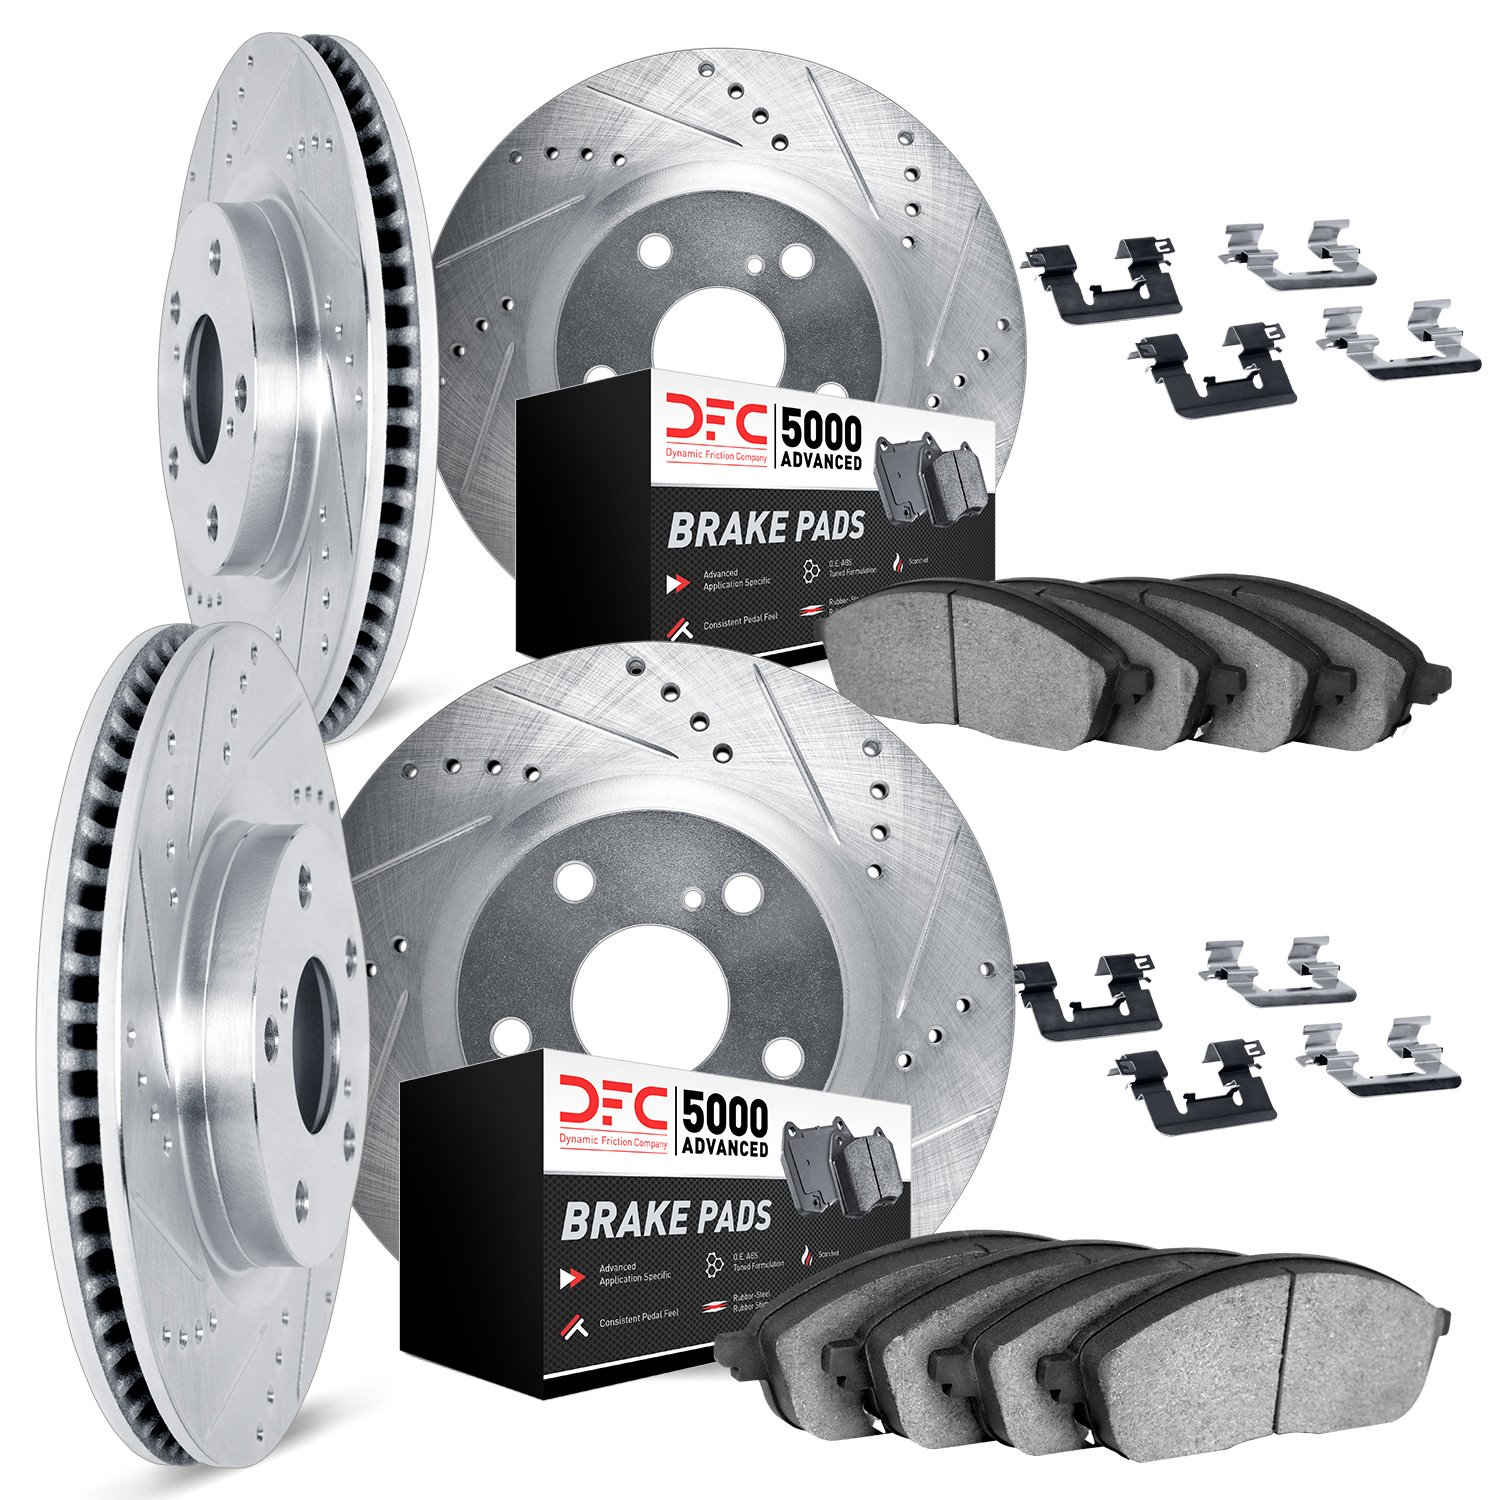 7514-13035 Drilled/Slotted Brake Rotors w/5000 Advanced Brake Pads Kit & Hardware [Silver], 2014-2018 Subaru, Position: Front an